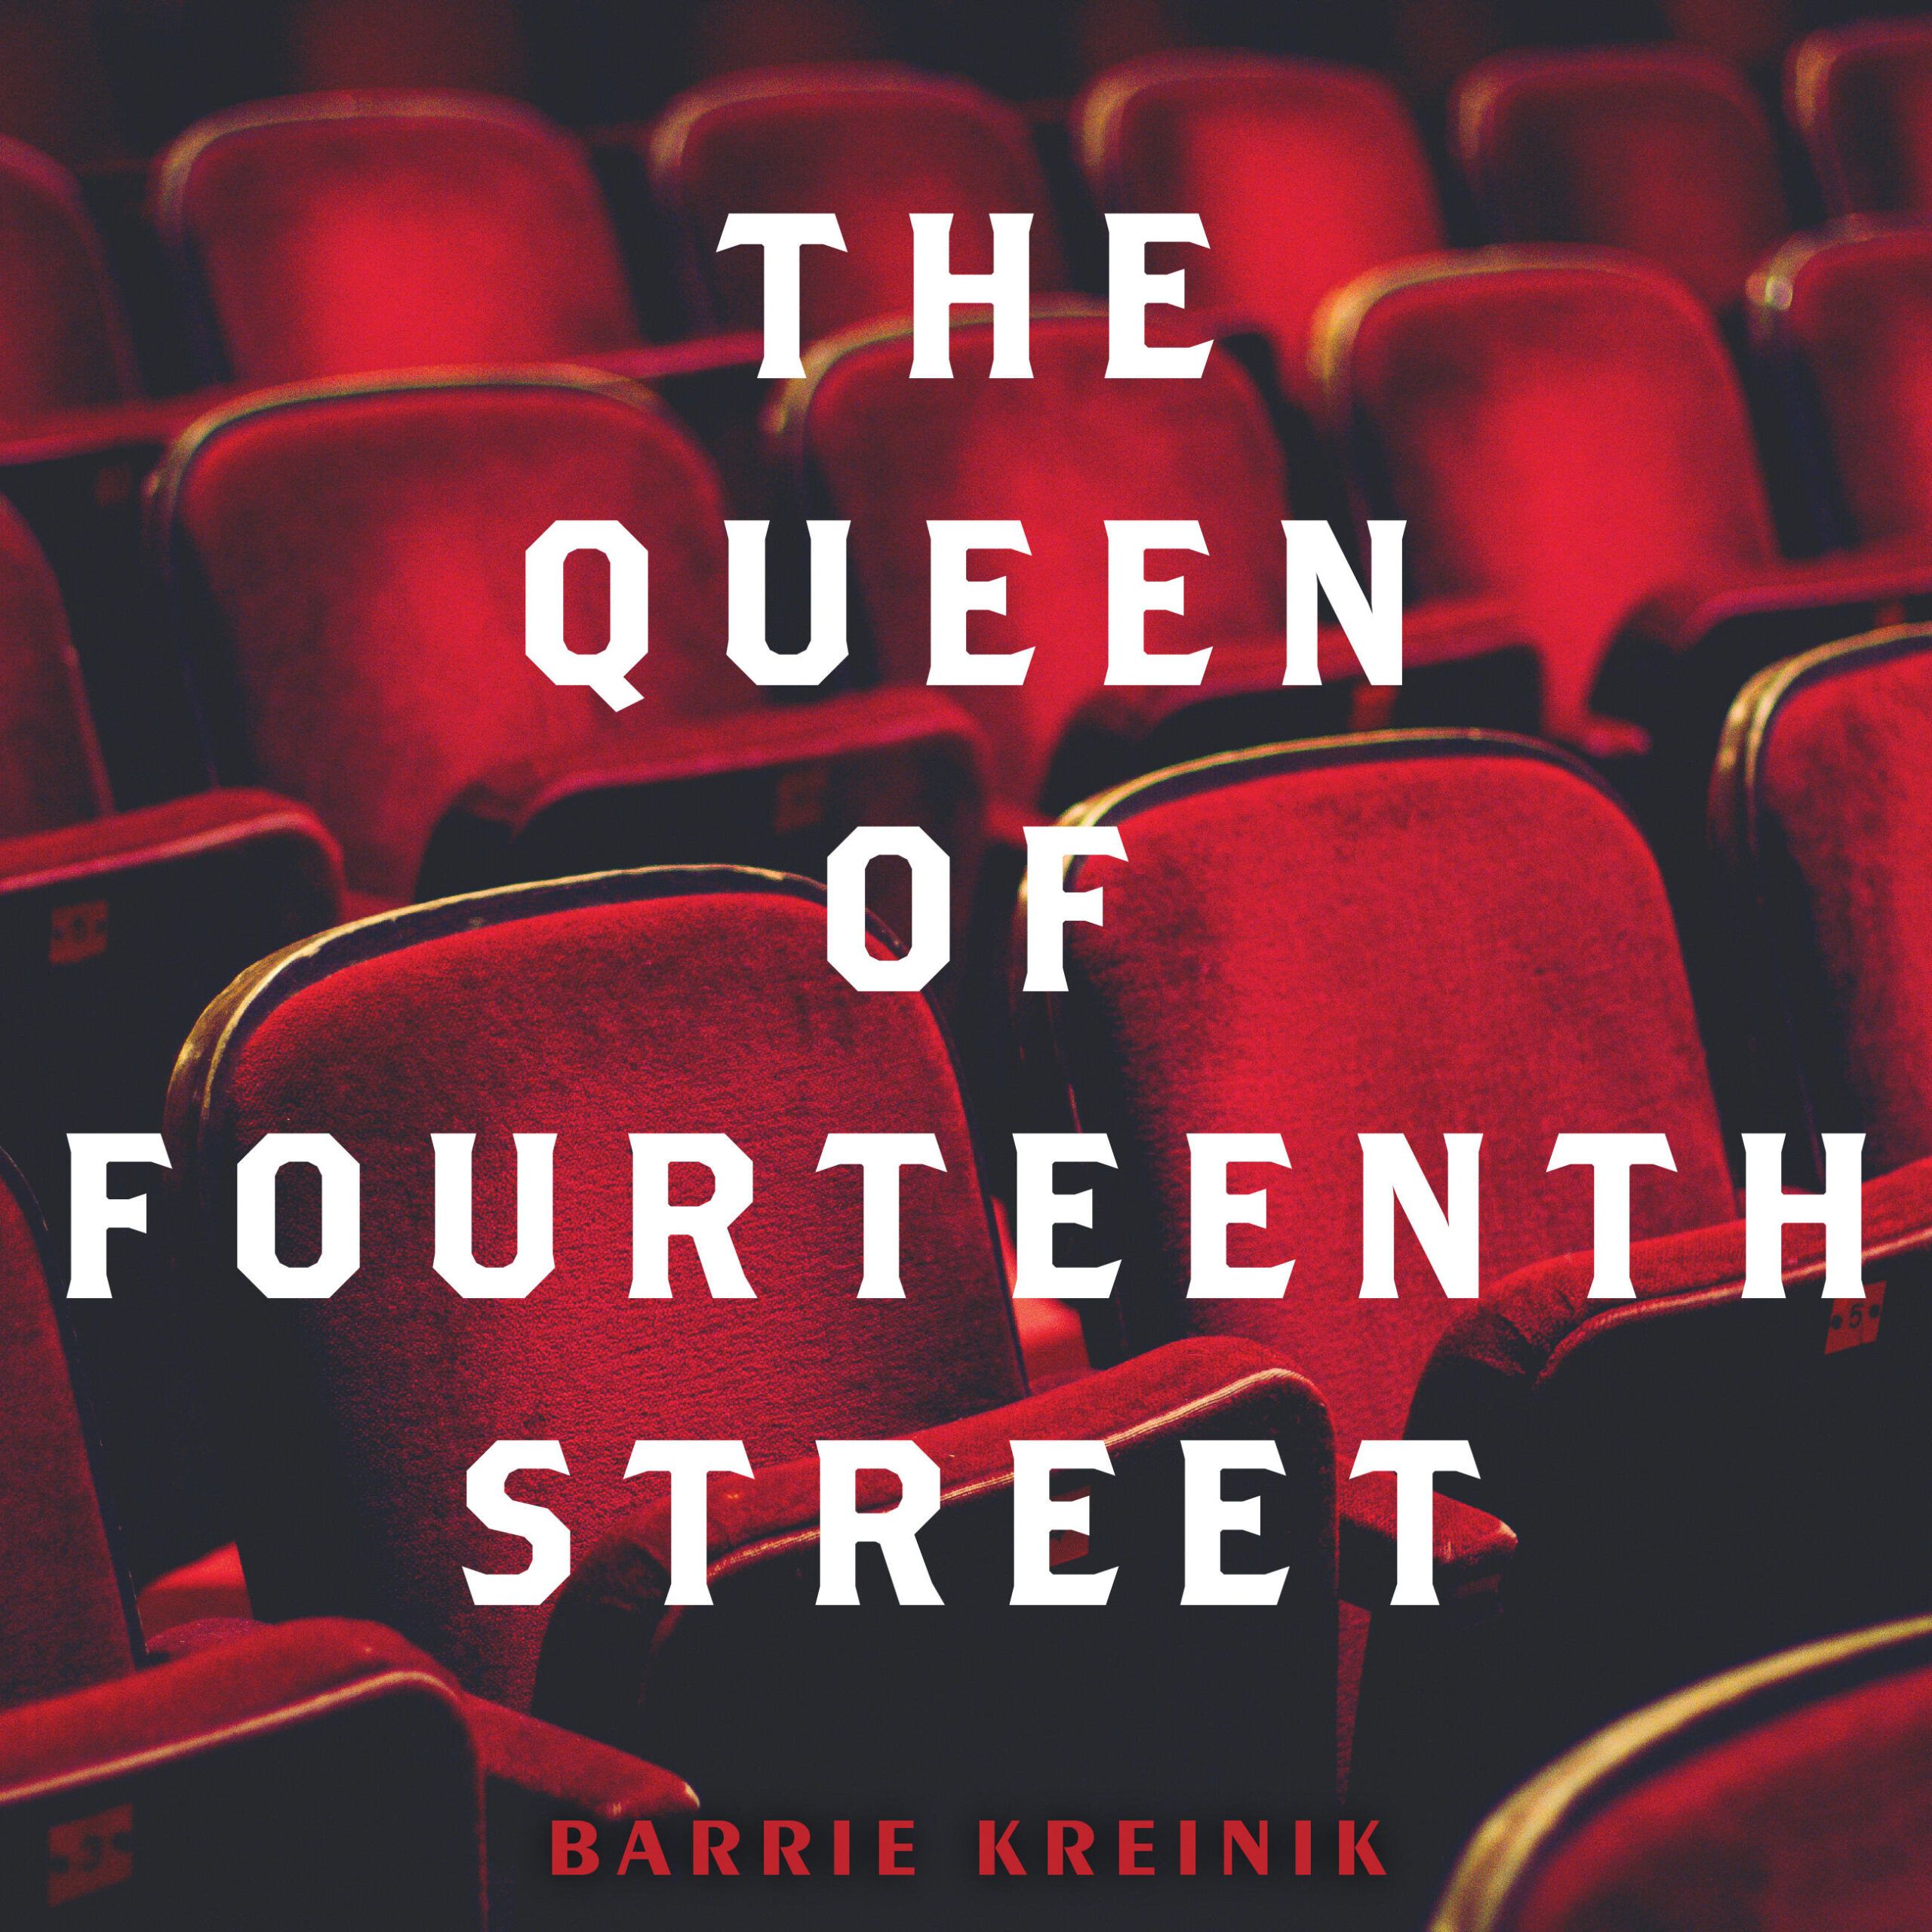 Audio book cover of The Queen of Fourteenth Street by Barrie Kreinik